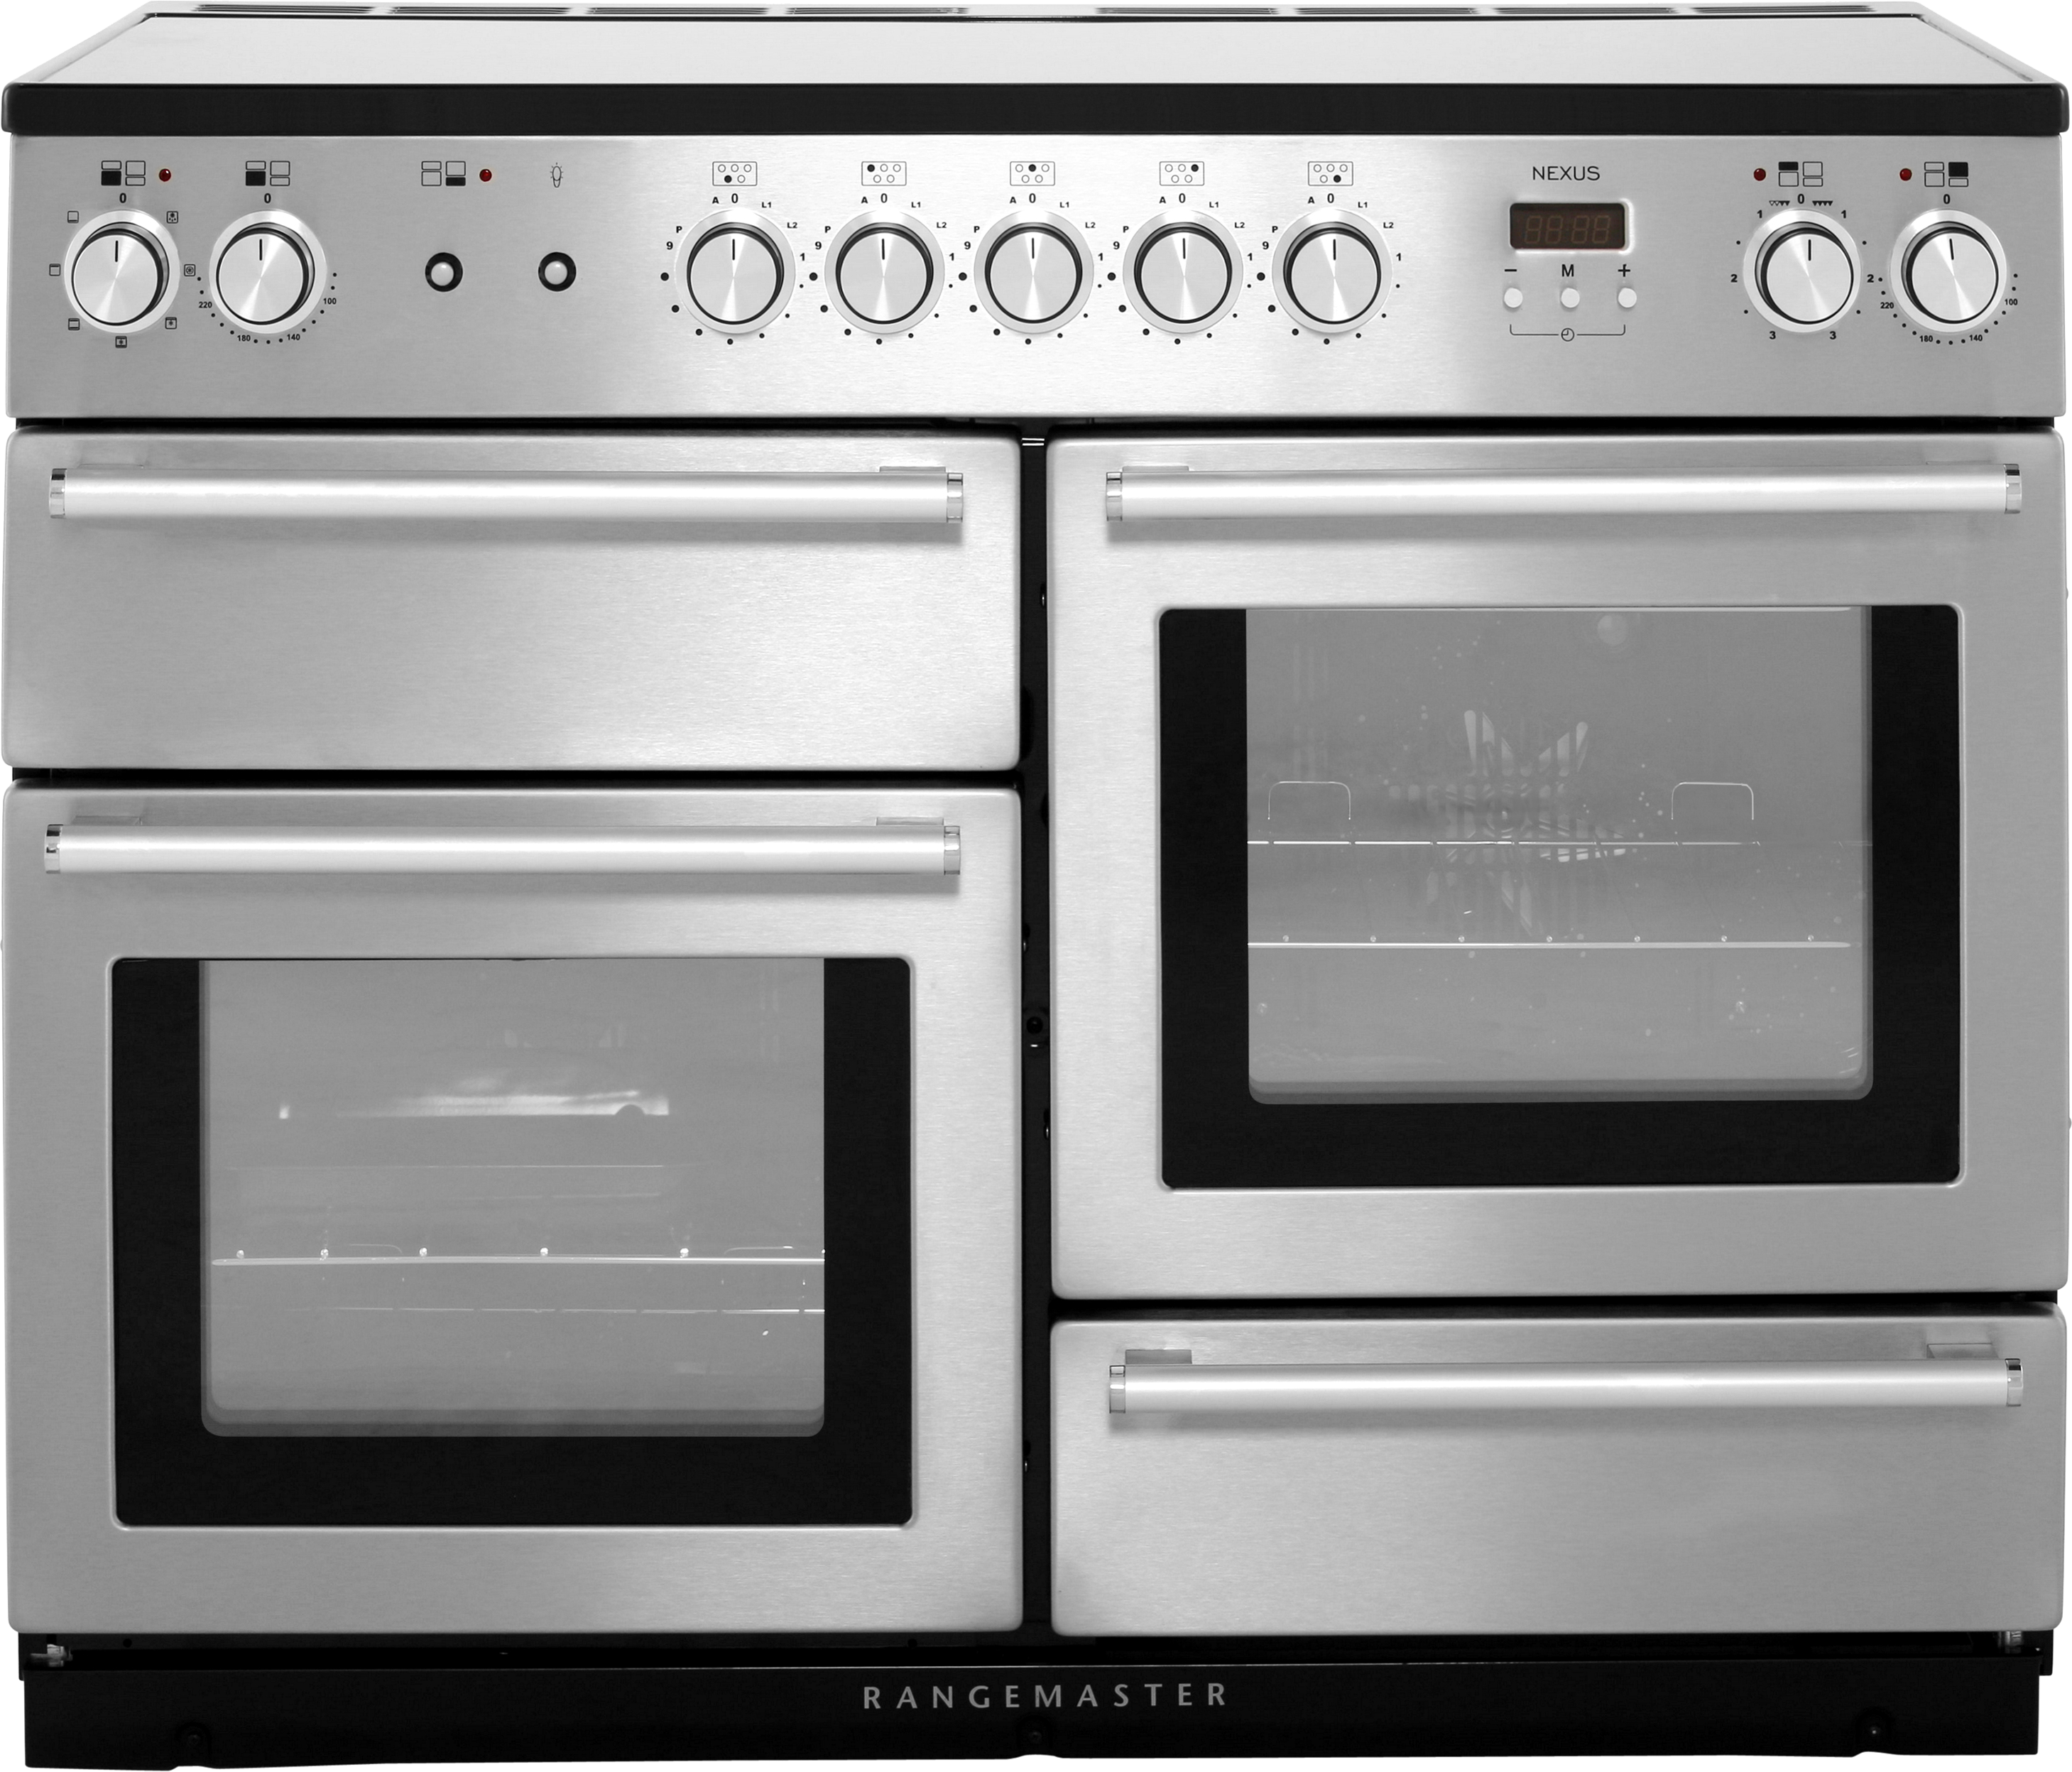 Rangemaster Nexus NEX110EISS/C 110cm Electric Range Cooker with Induction Hob - Stainless Steel / Chrome - A/A Rated, Stainless Steel